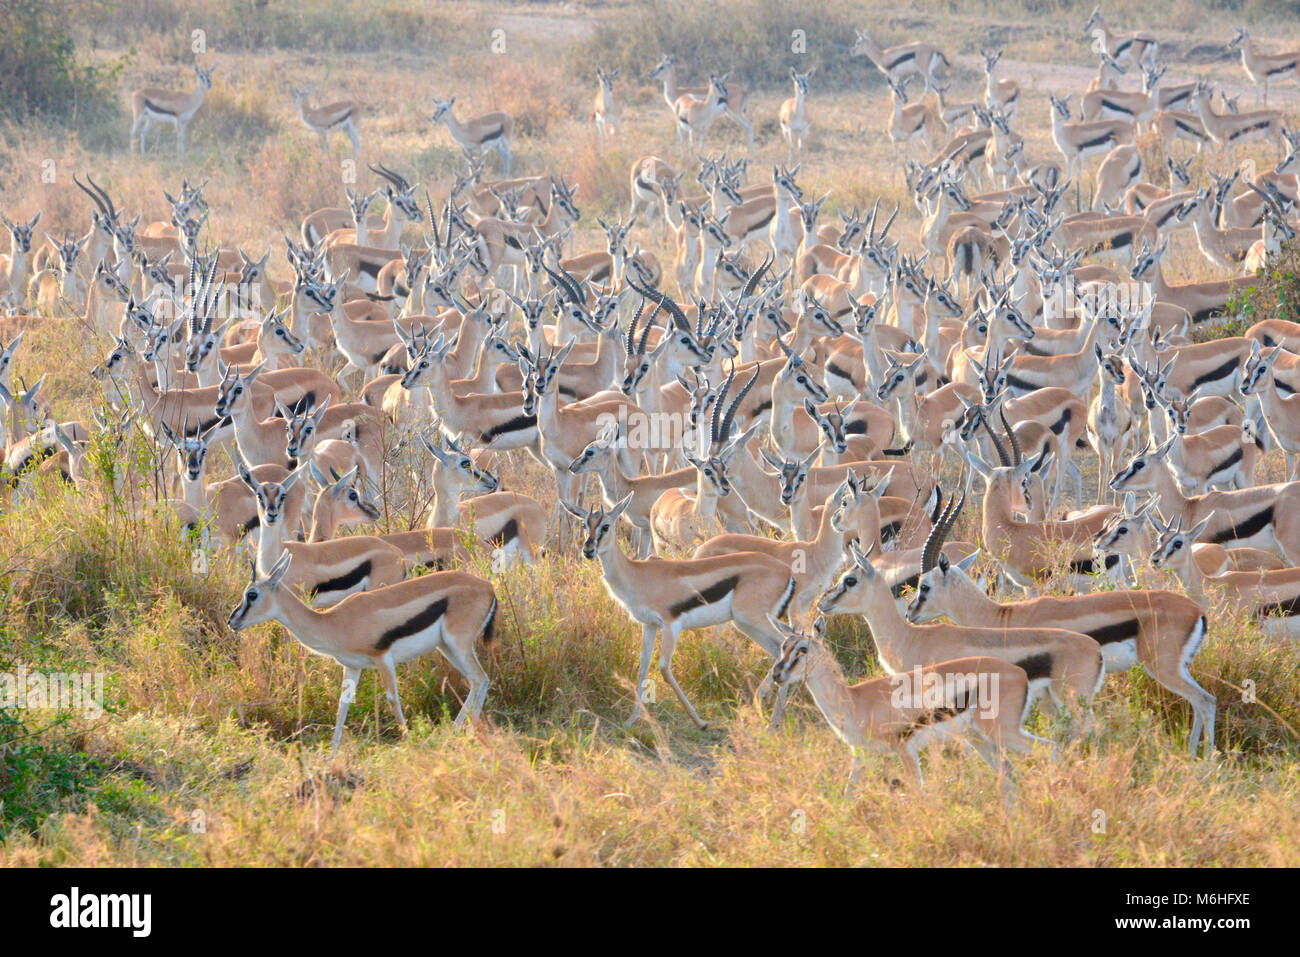 Serengeti National Park in Tanzania, is one of the most spectacular wildlife destinations on earth. Thomsons gazelle migration Stock Photo